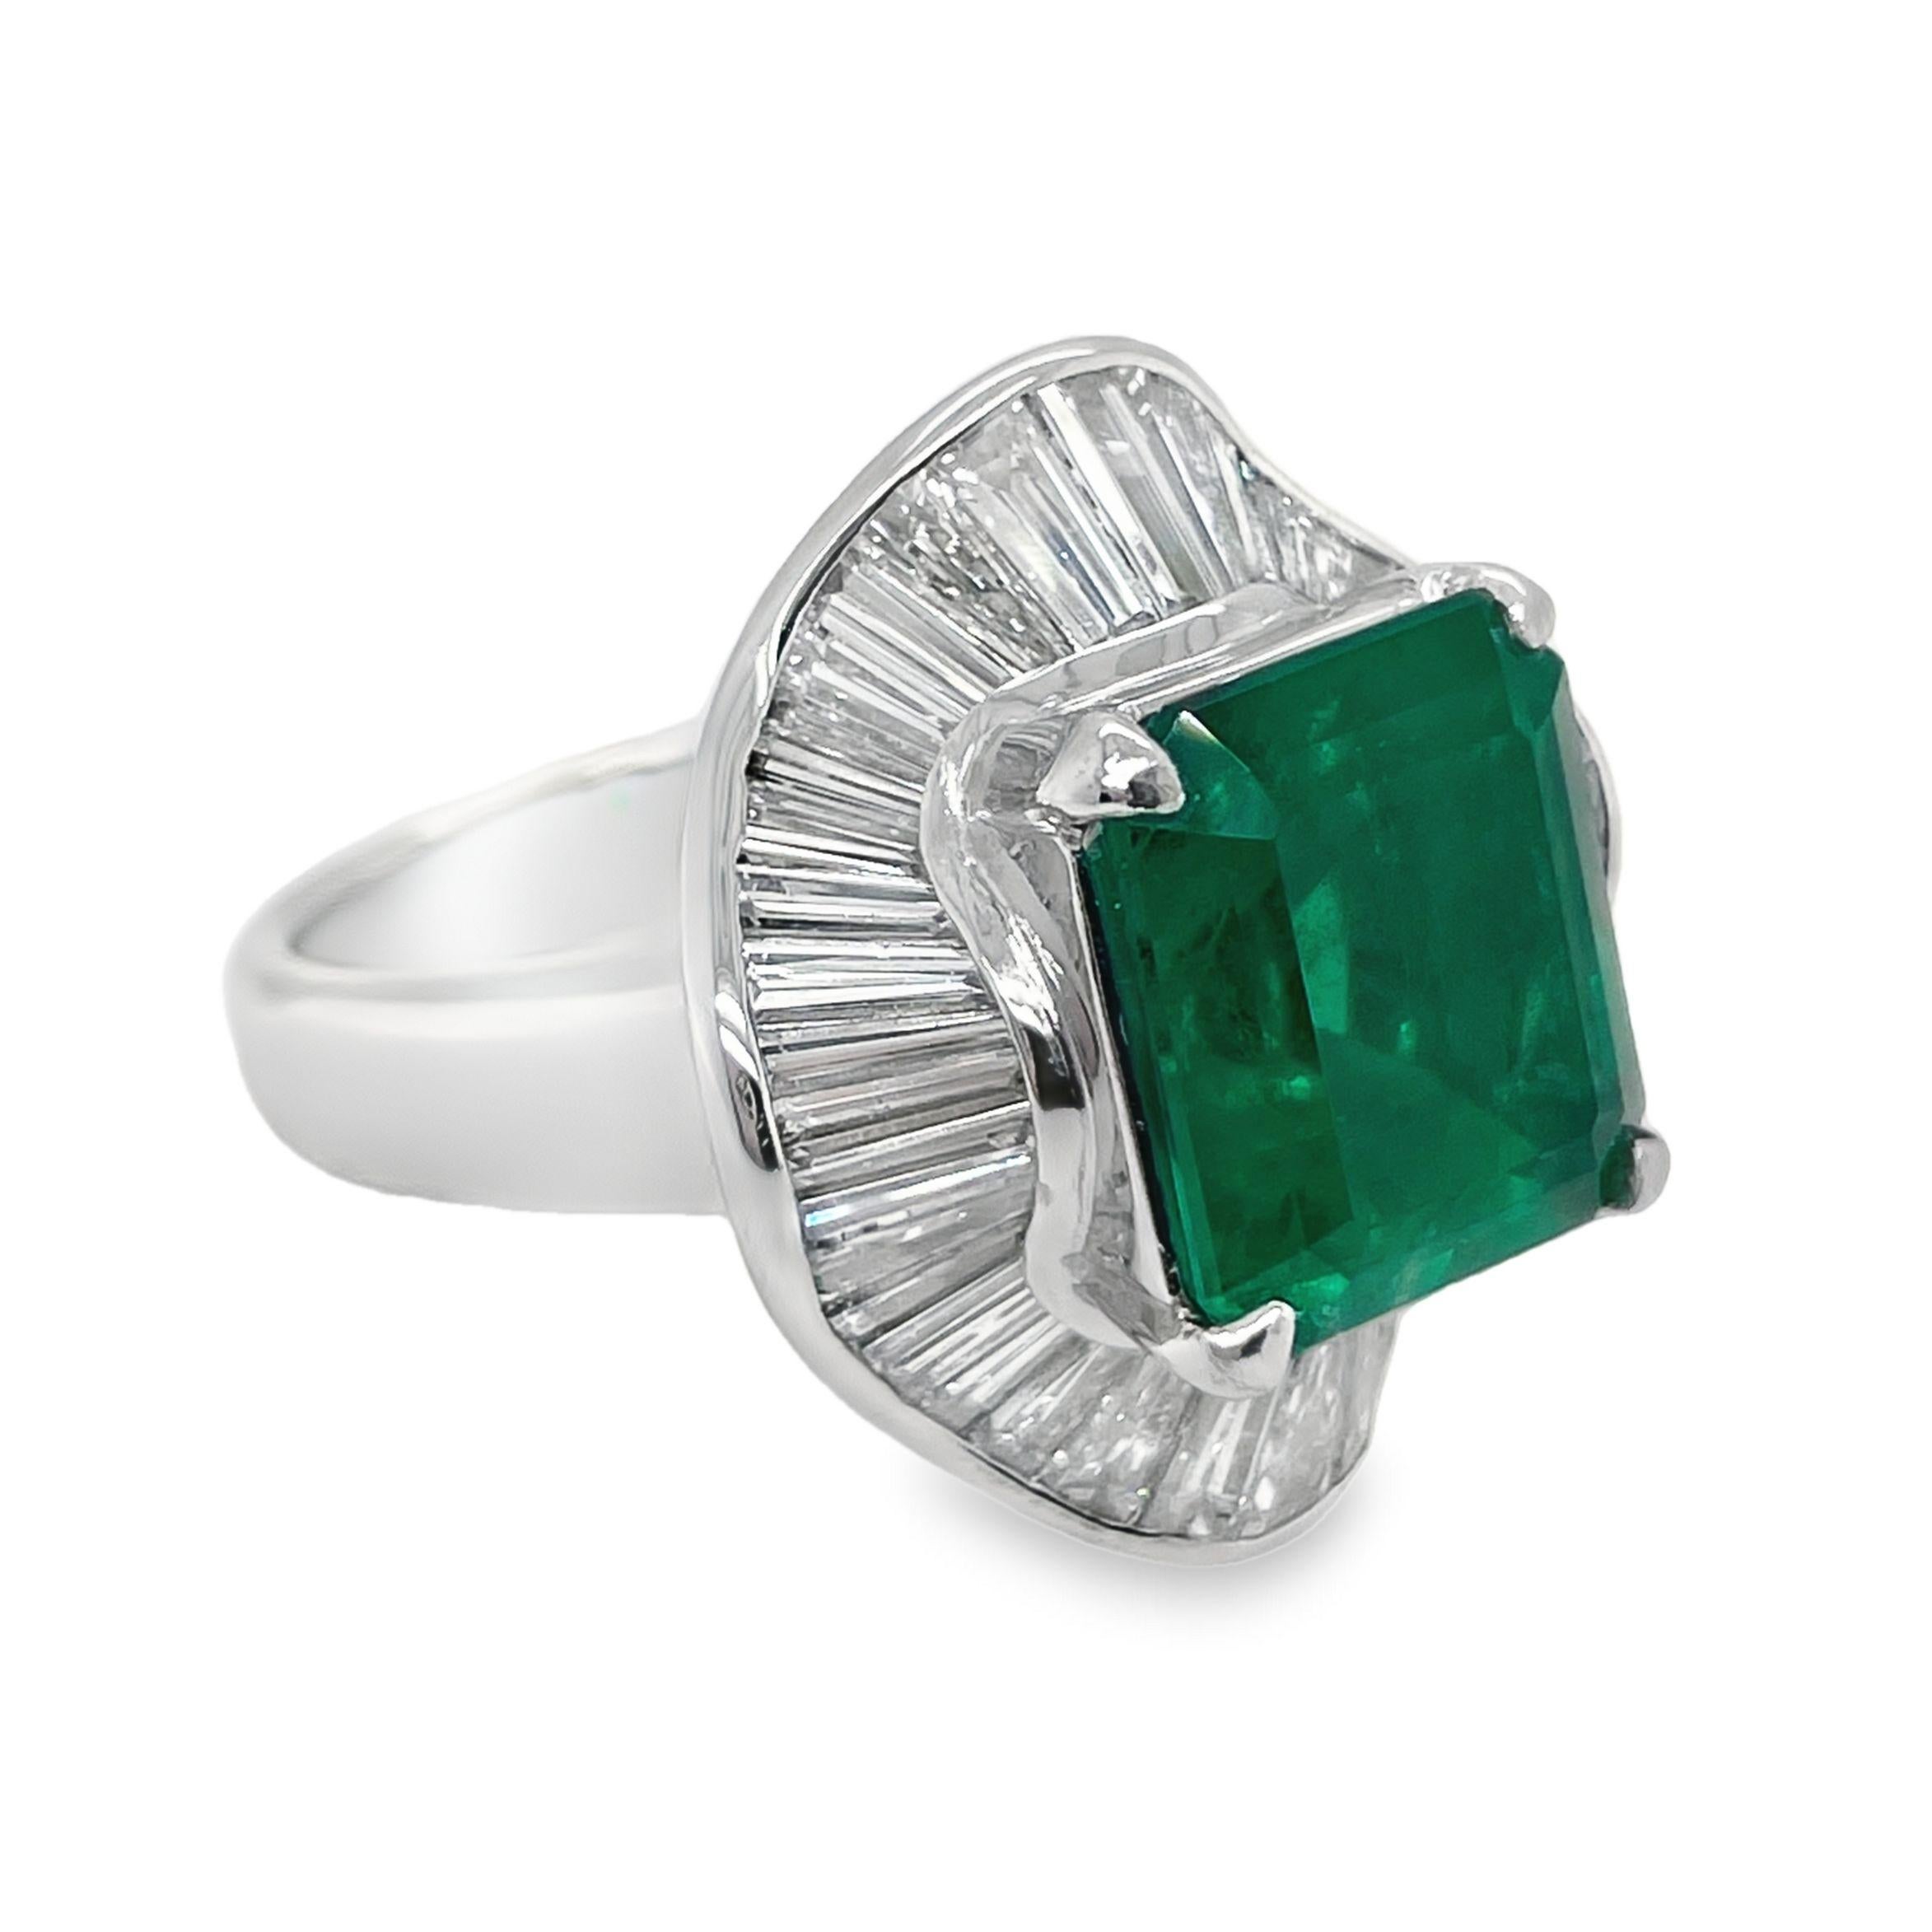 Emerald Cut GIA Certified 6.19ct Colombia Emerald 2.47ct Natural Diamonds Platinum Ring For Sale